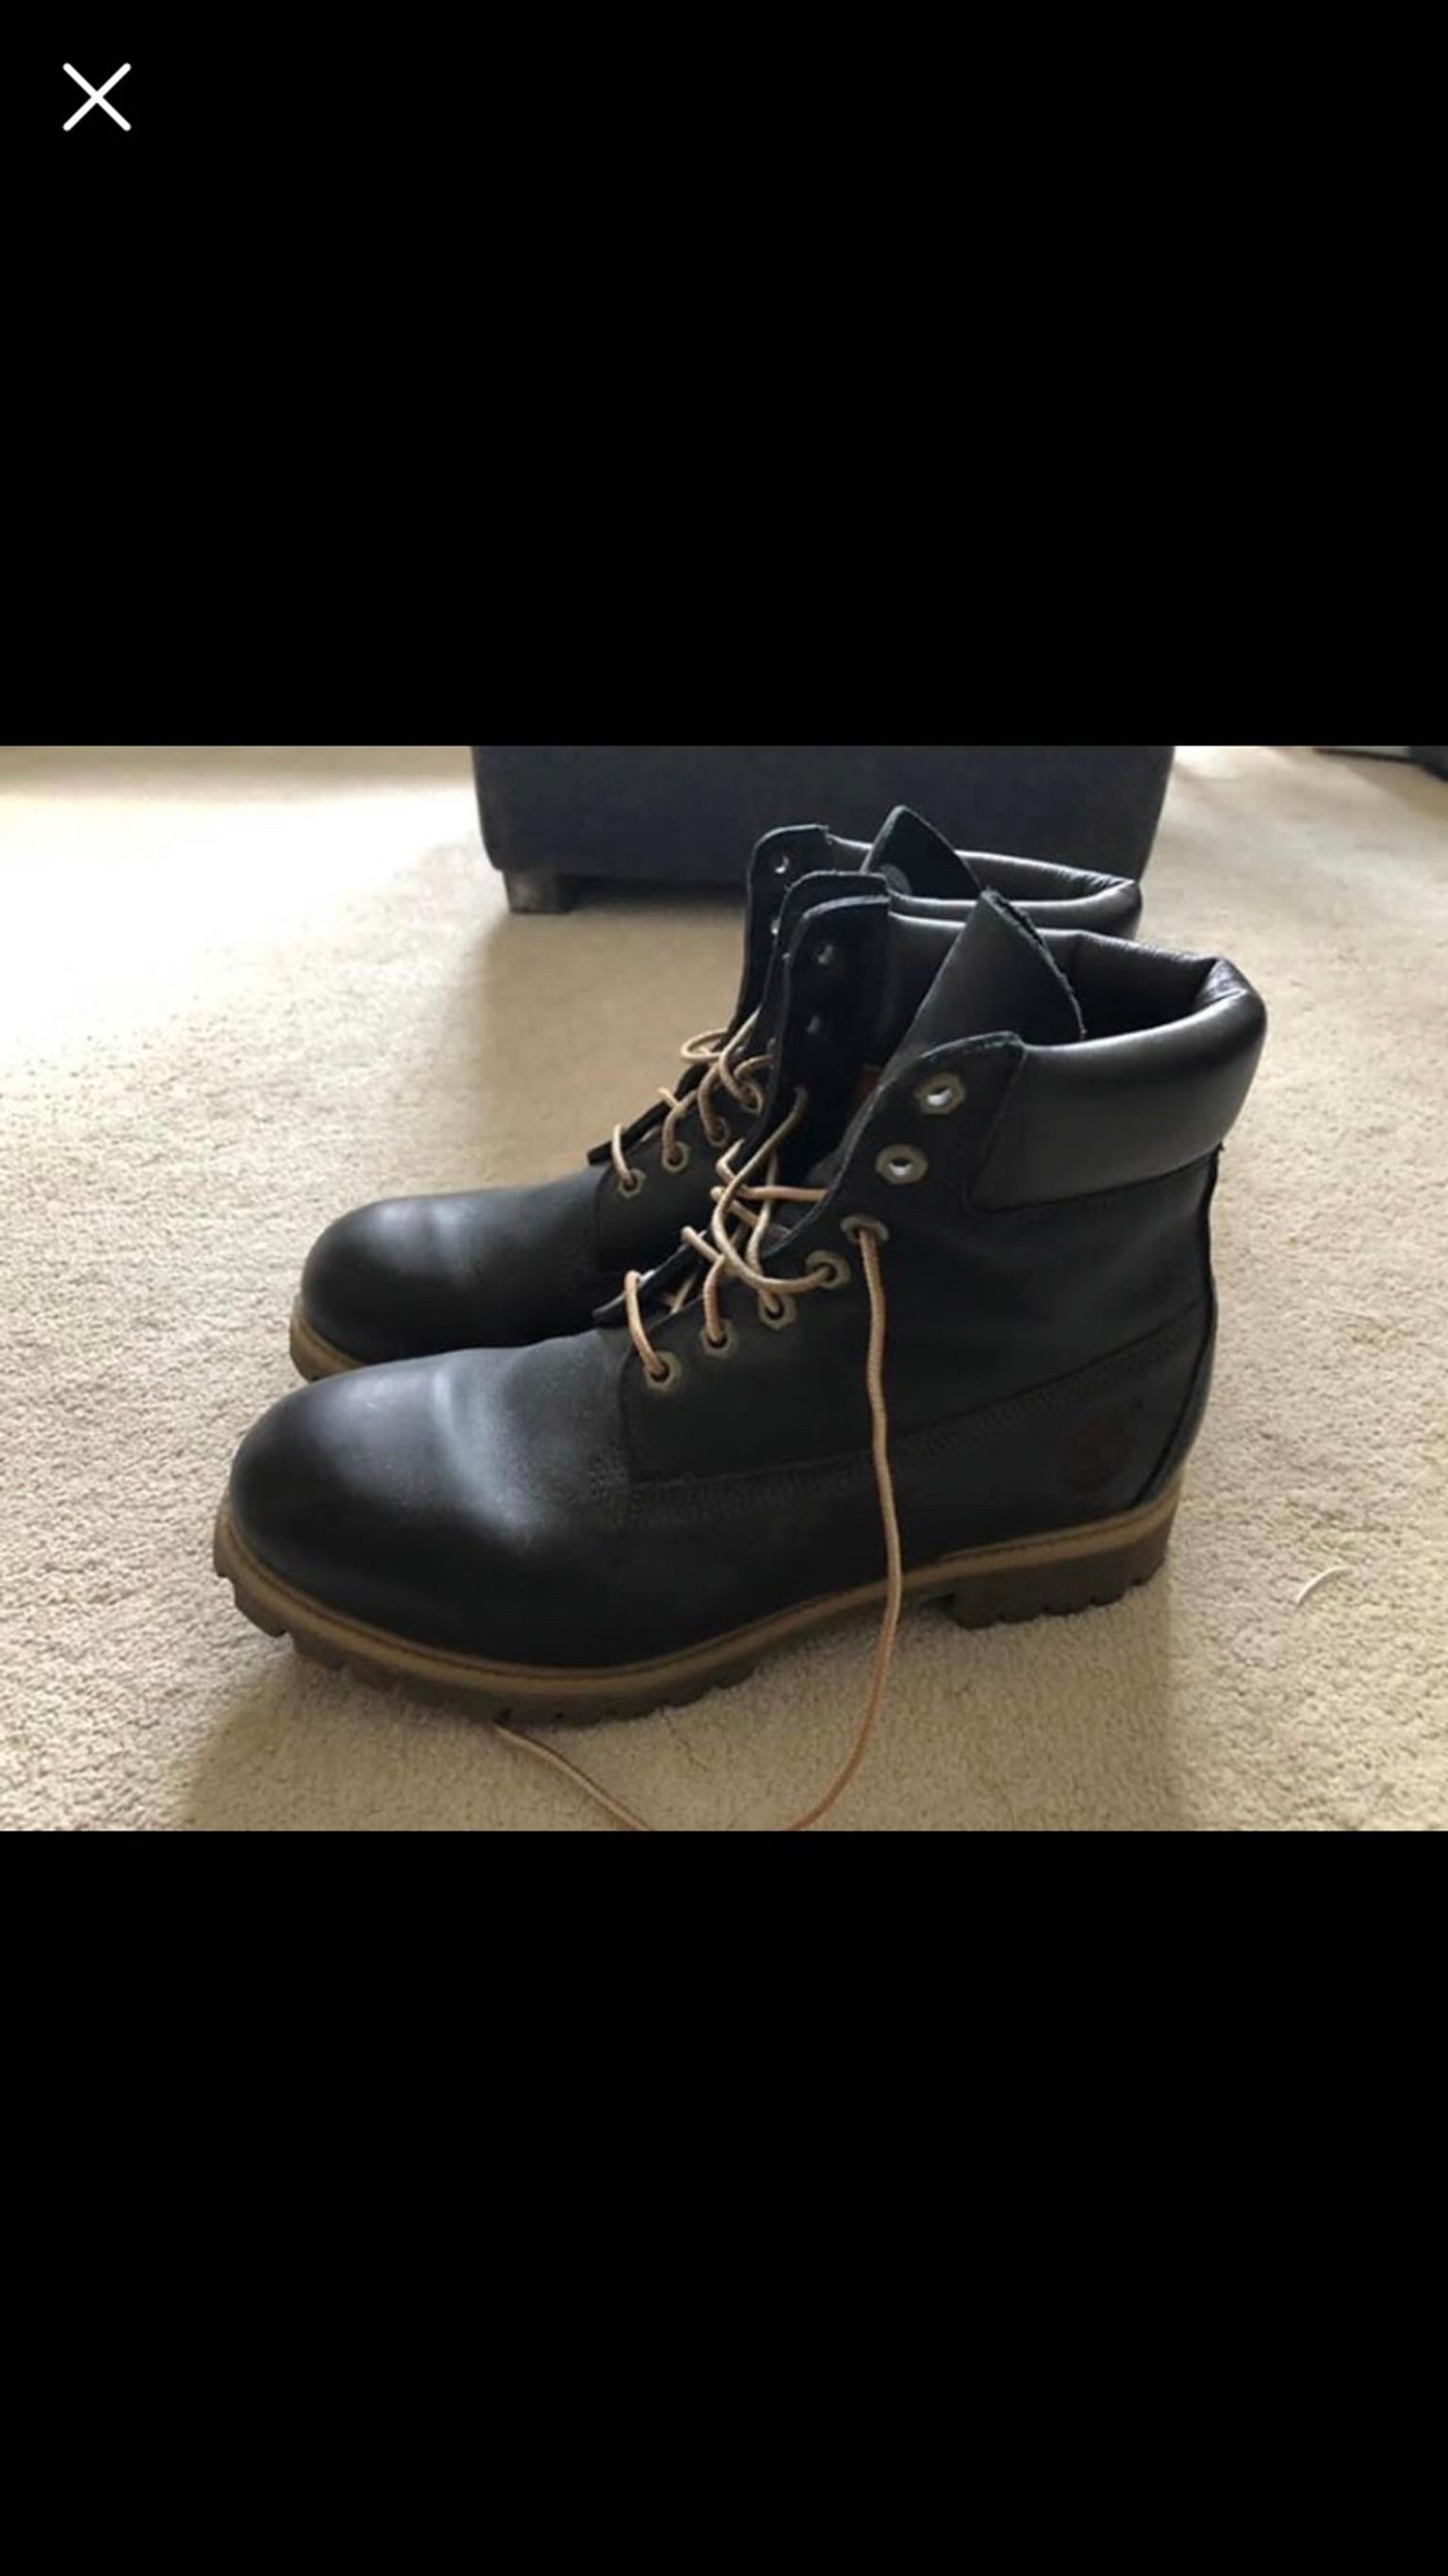 mens timberland boots size 10